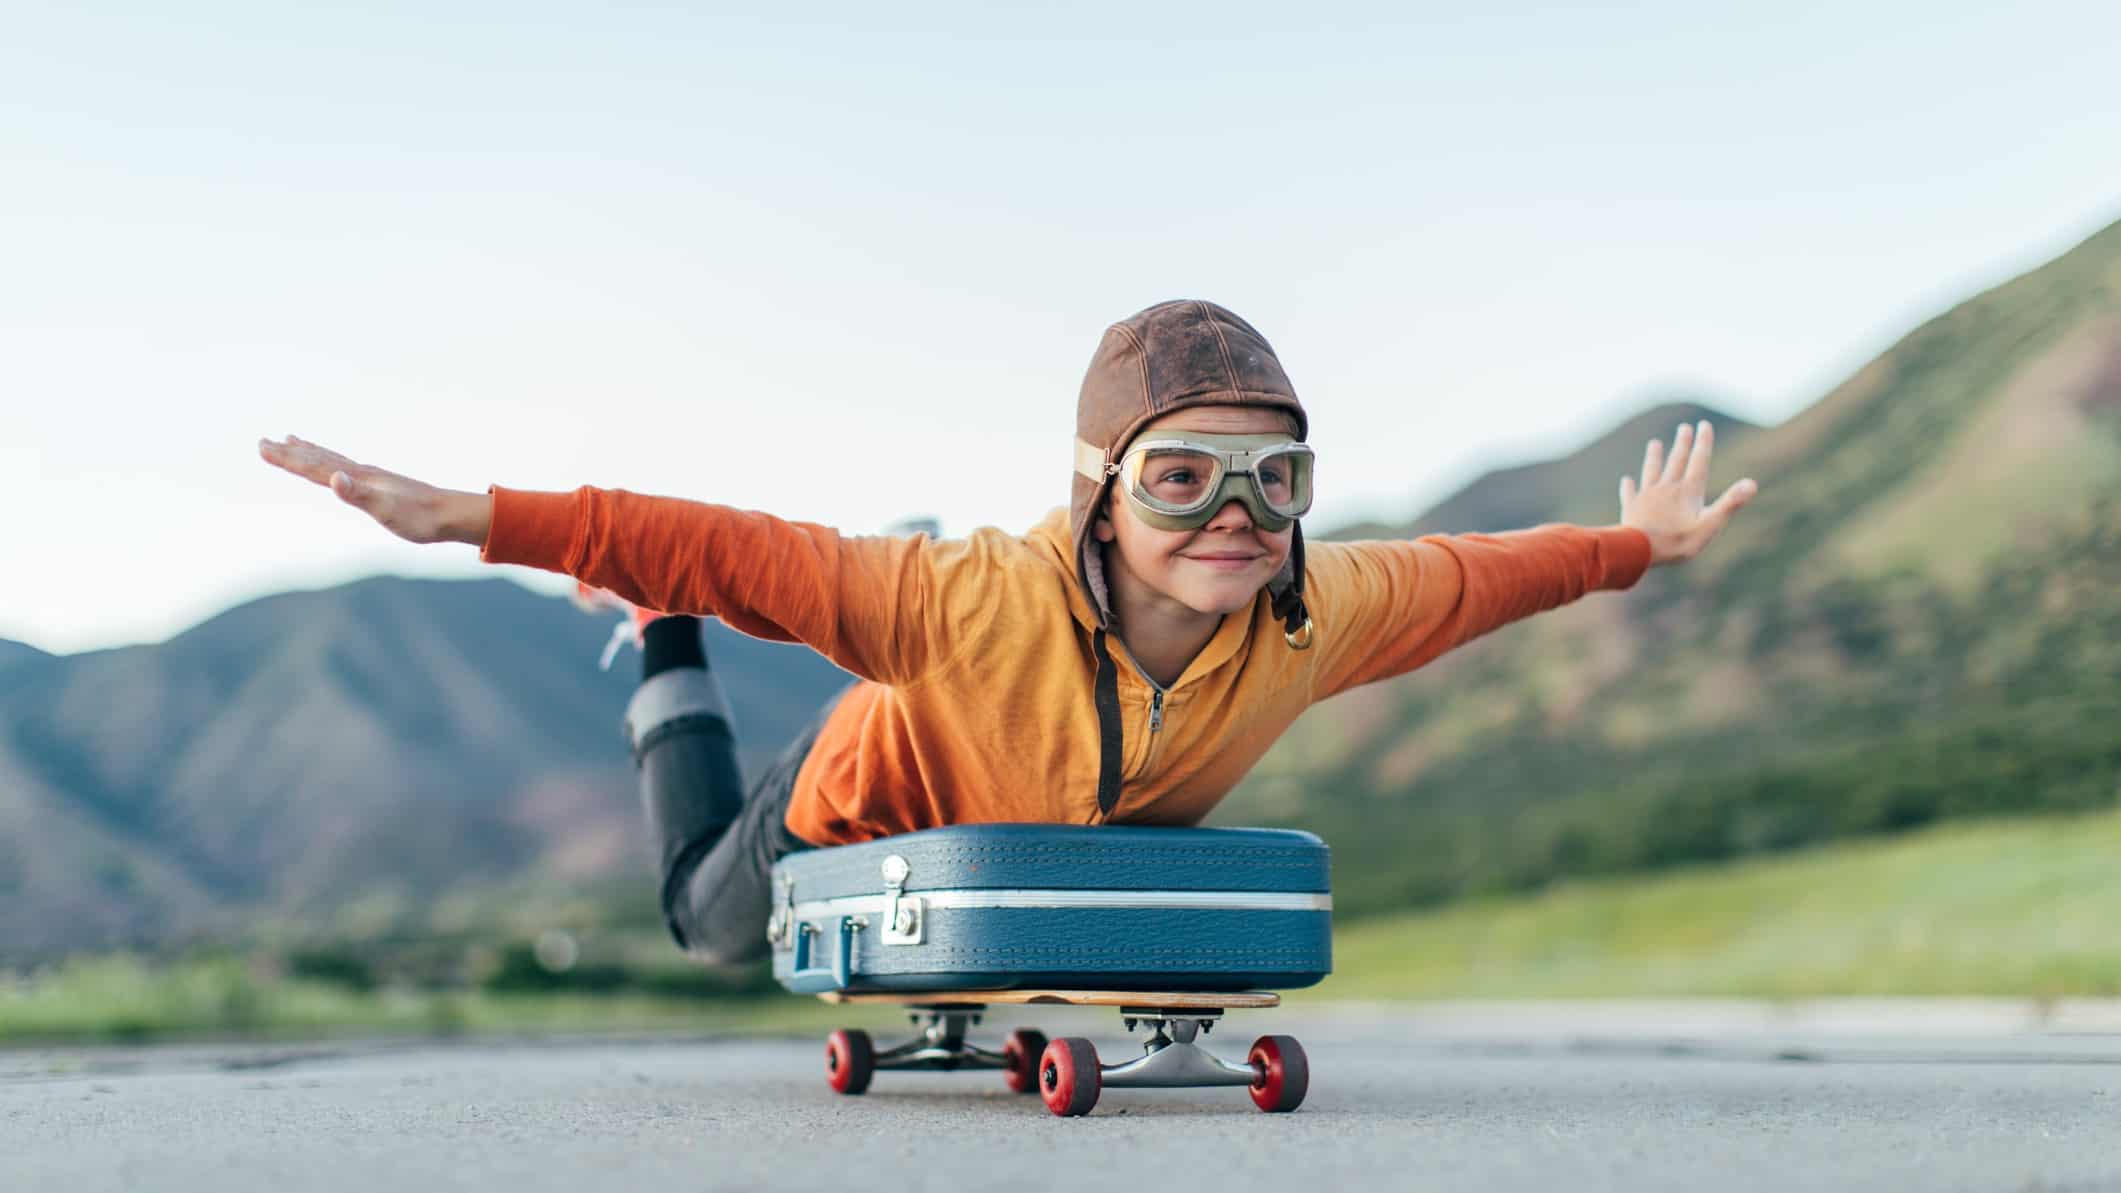 boy in flying gear simulating taking off in an aircraft by laying an a skateboard with arms out